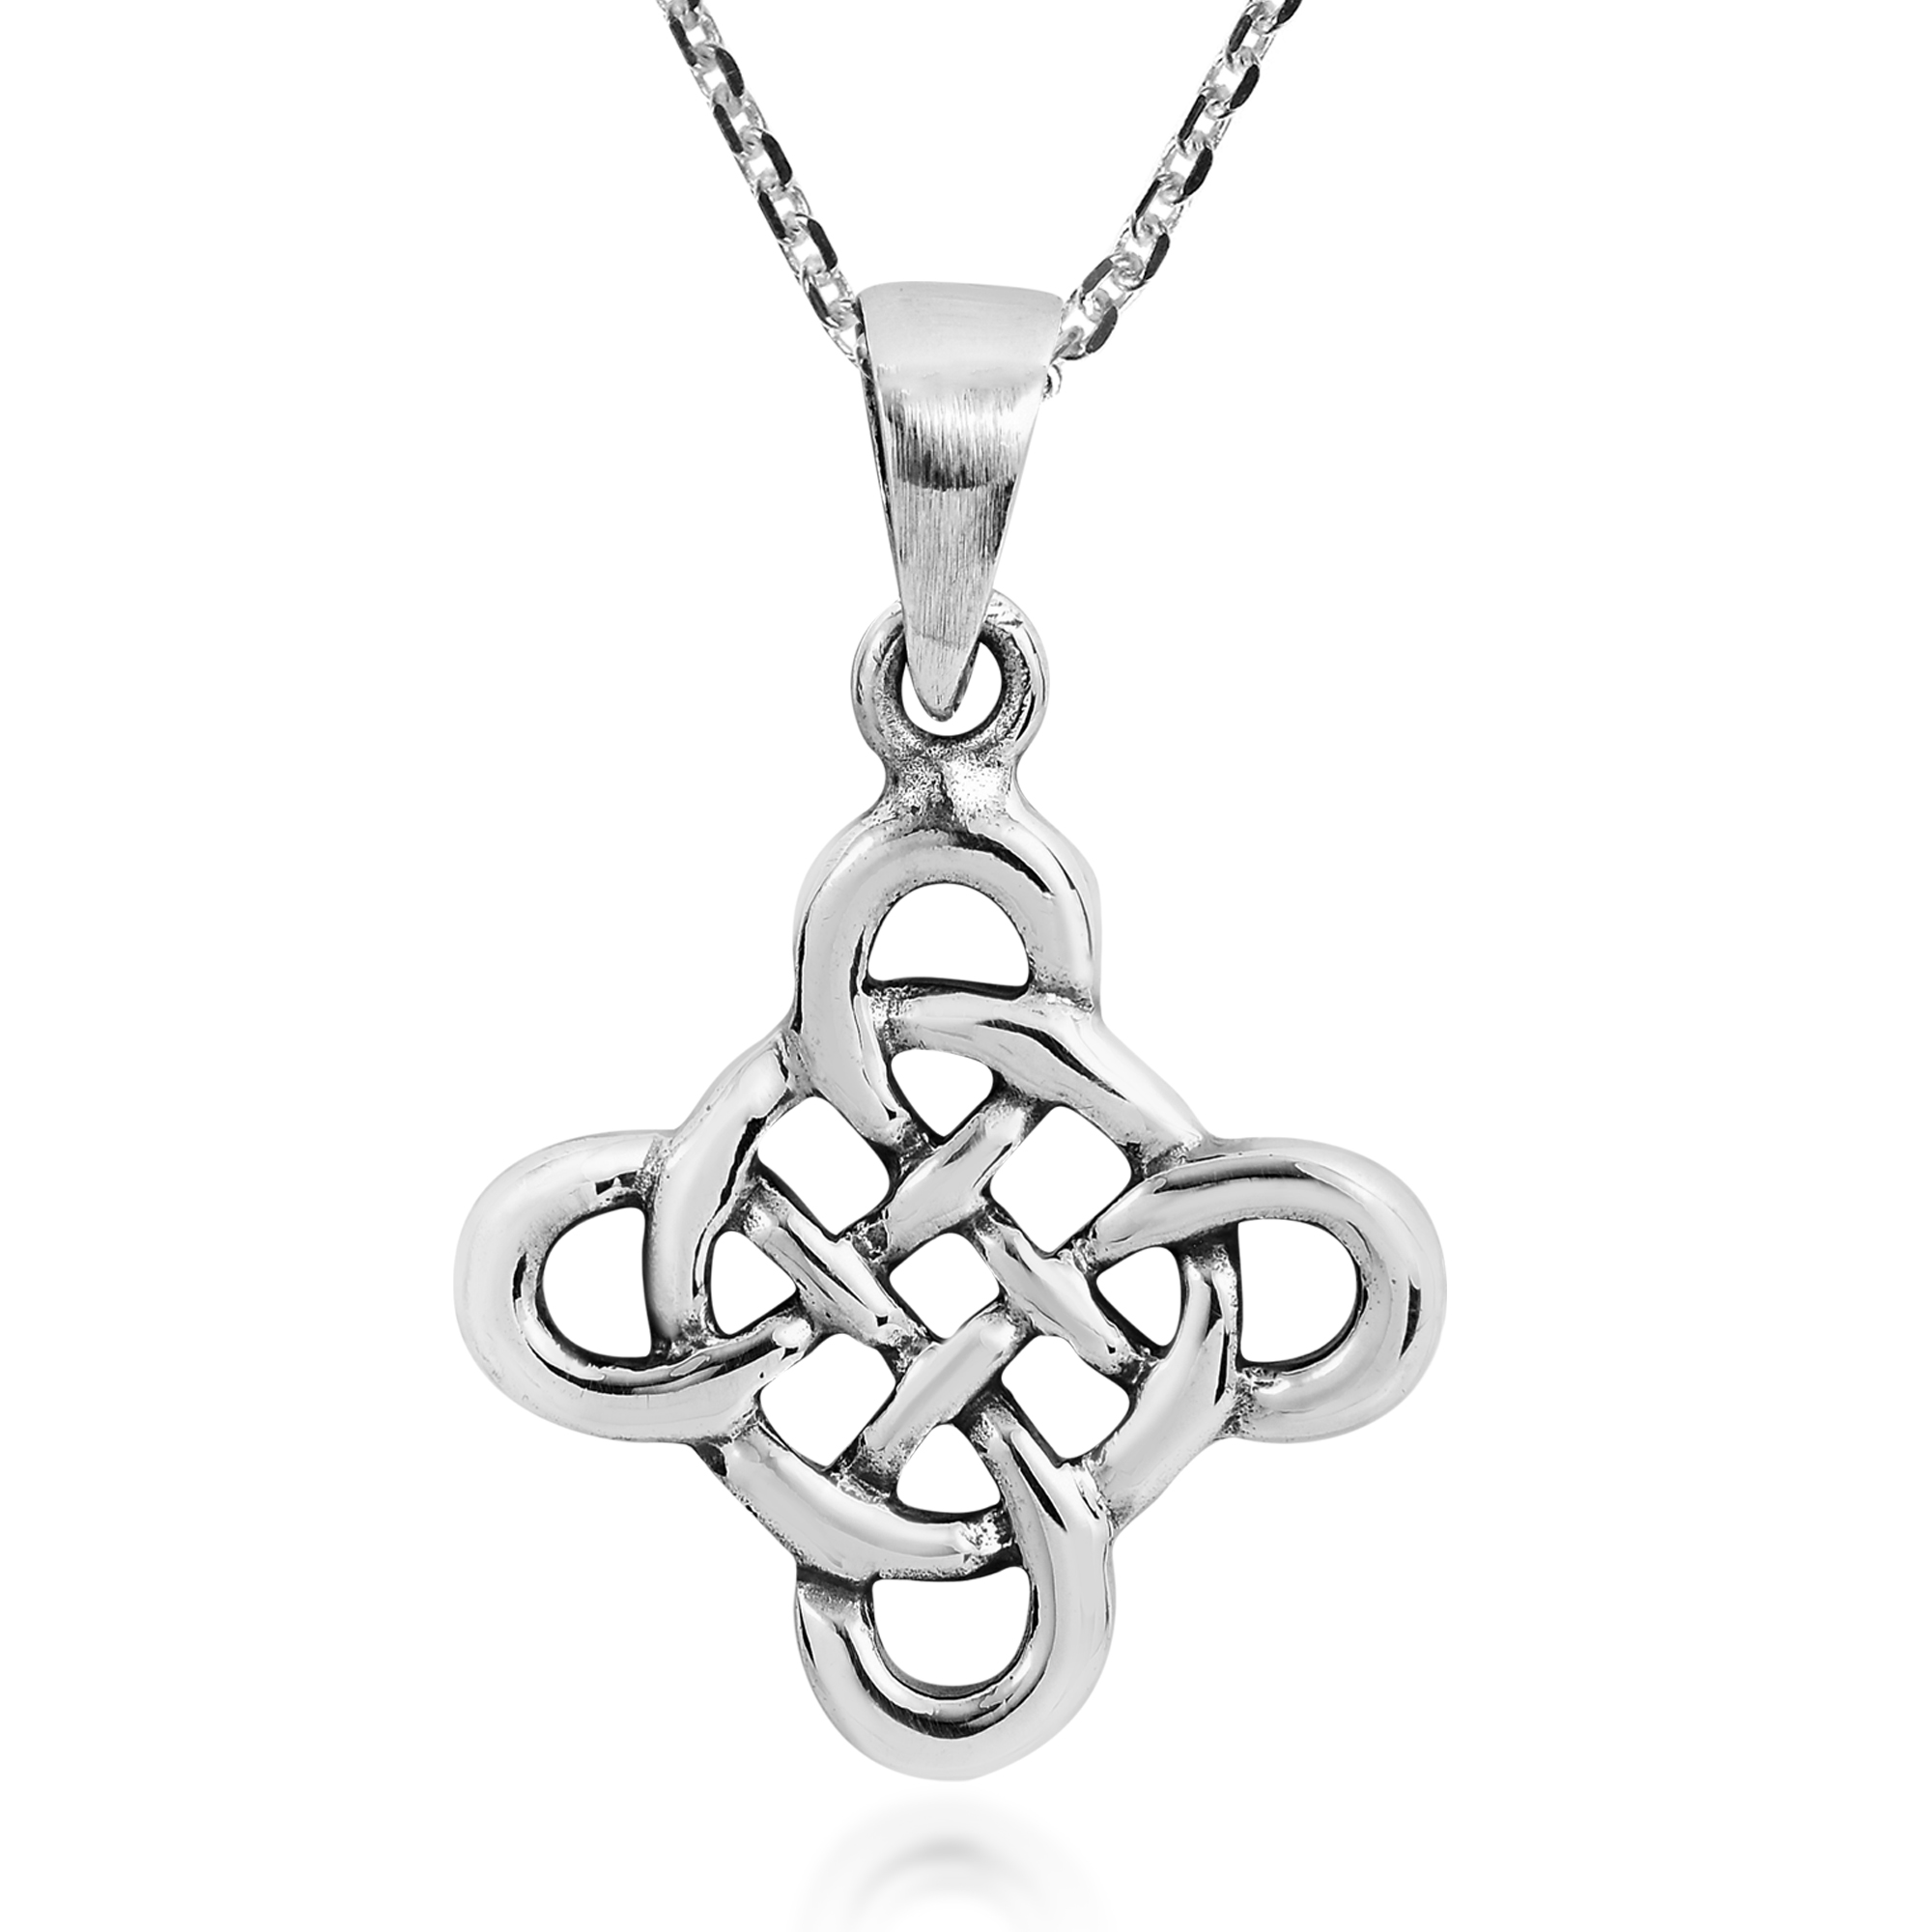 Symbolic Quaternary Celtic Infinity Knot Cross Sterling Silver Necklace